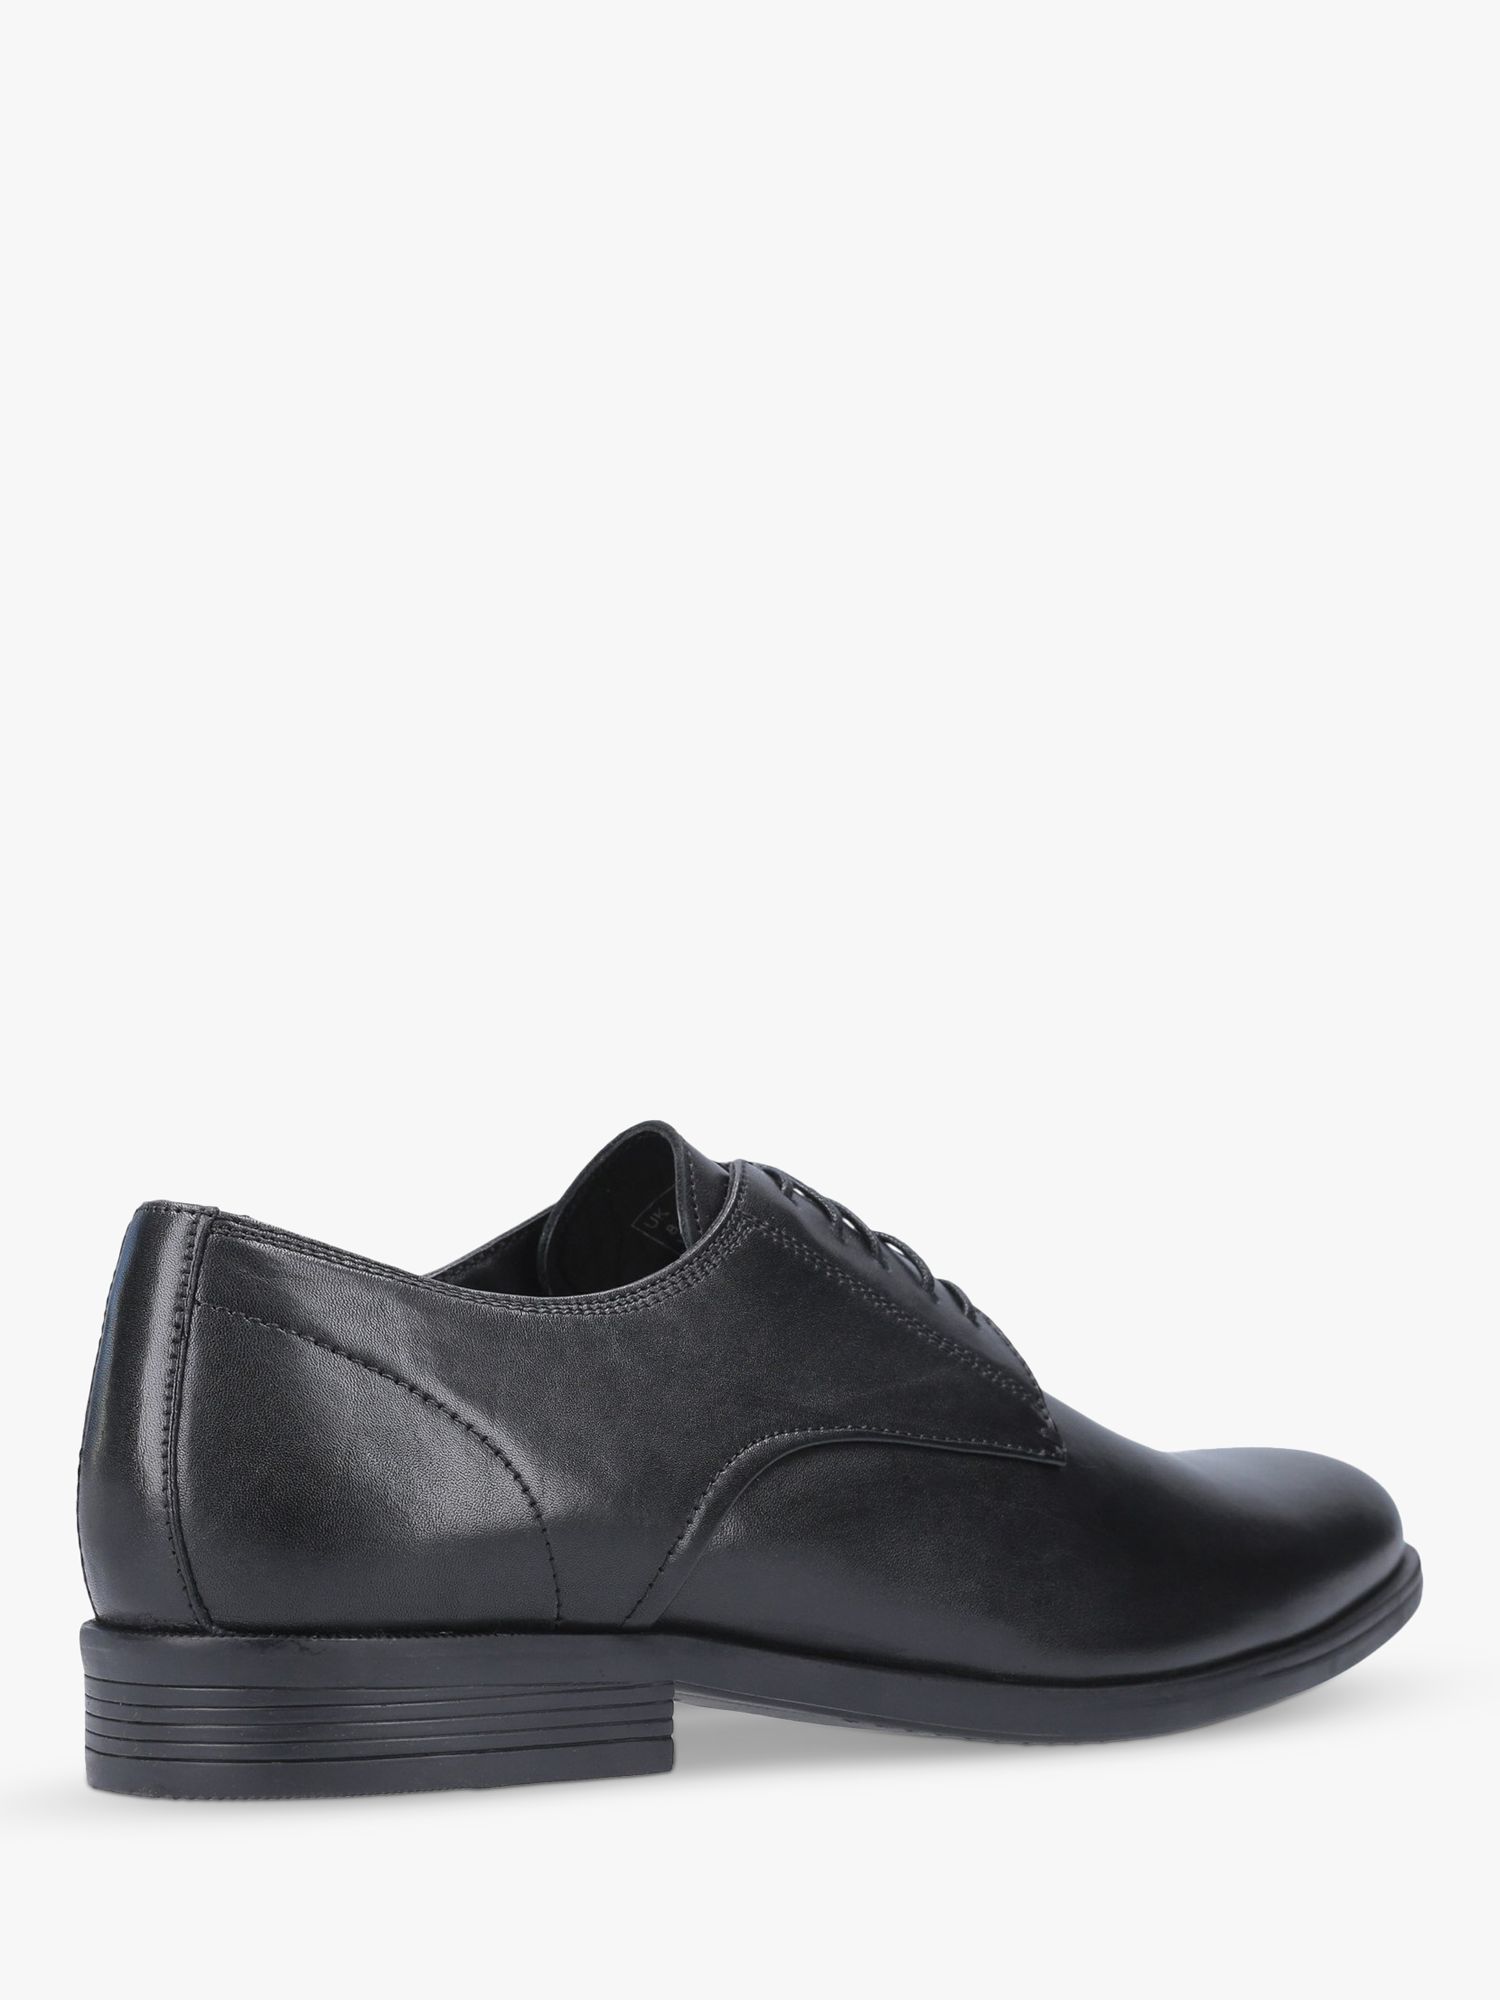 Buy Hush Puppies Oscar Clean Toe Leather Oxford Shoes Online at johnlewis.com